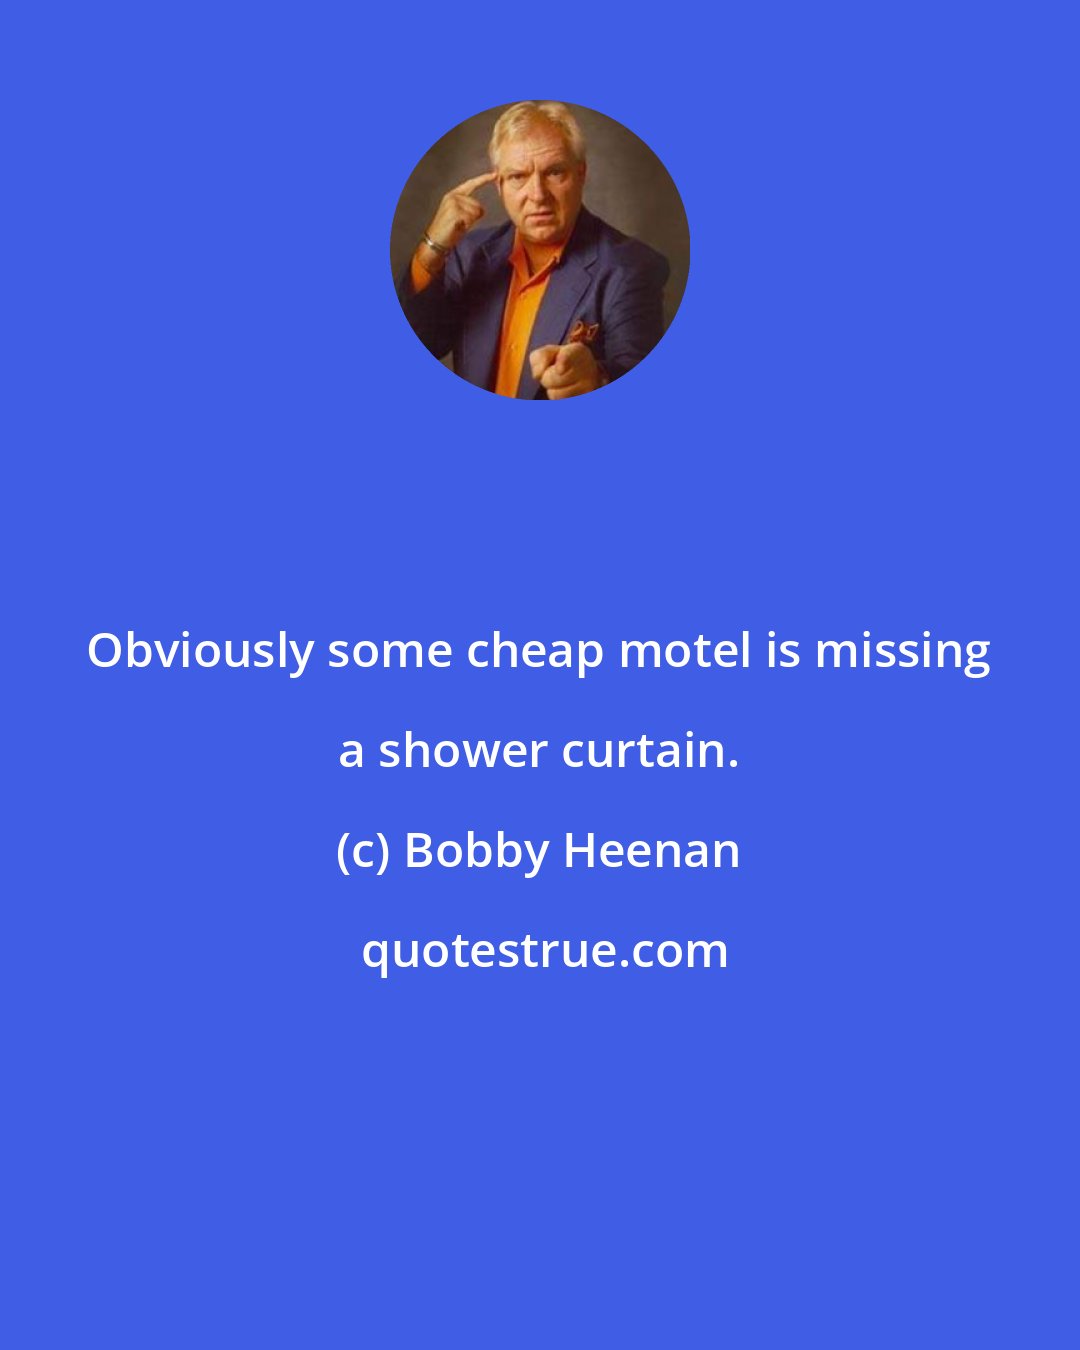 Bobby Heenan: Obviously some cheap motel is missing a shower curtain.